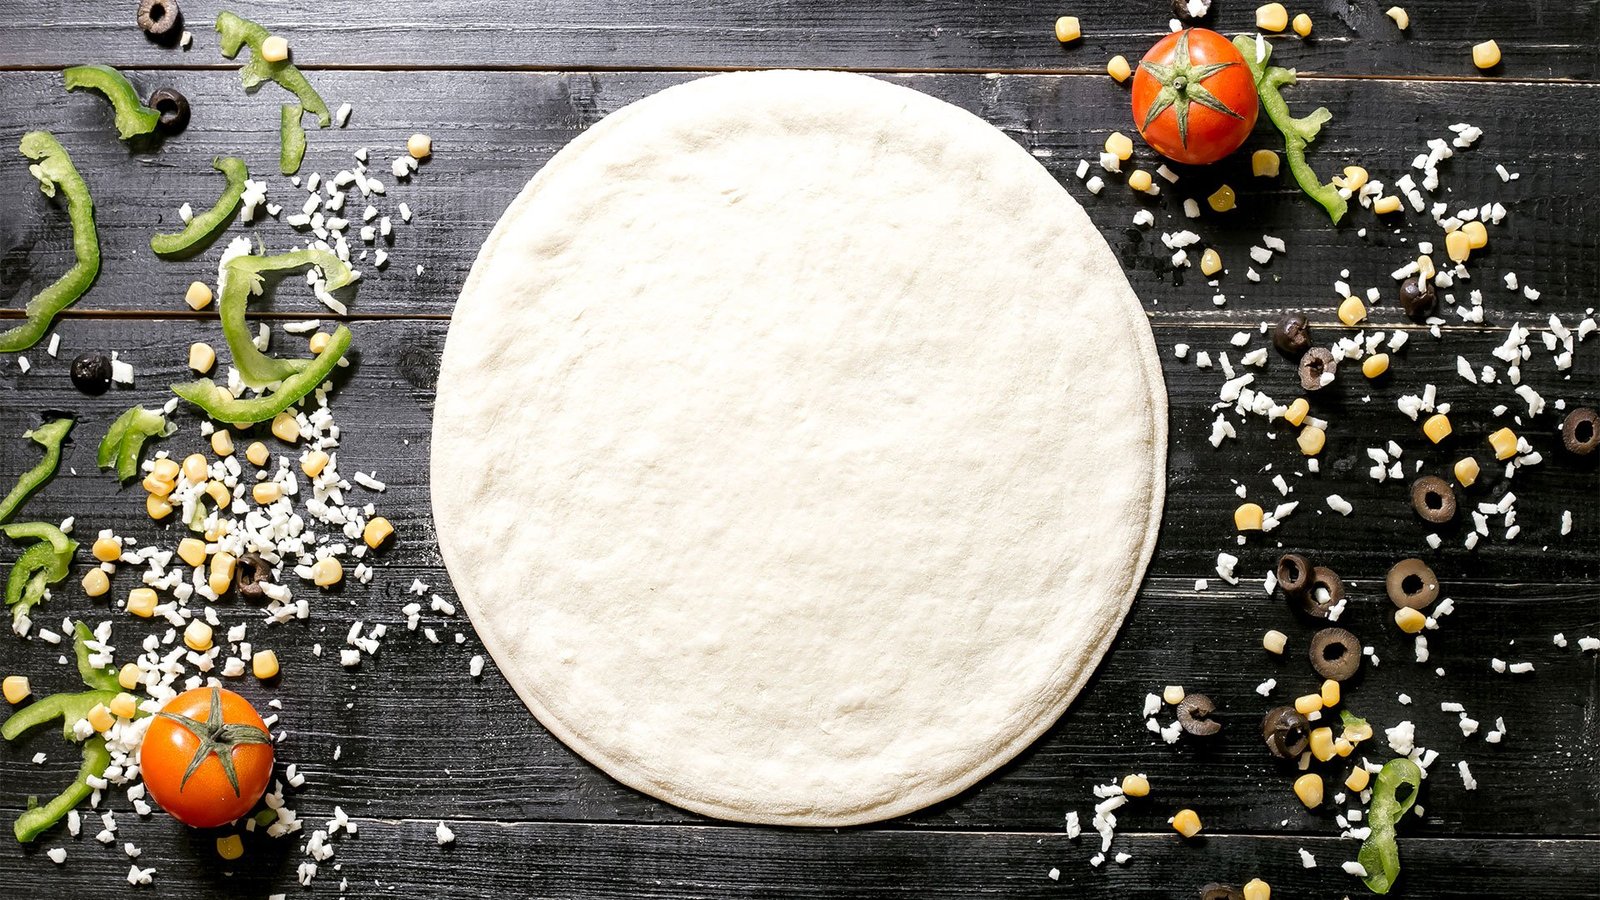 How to Make easy pizza dough